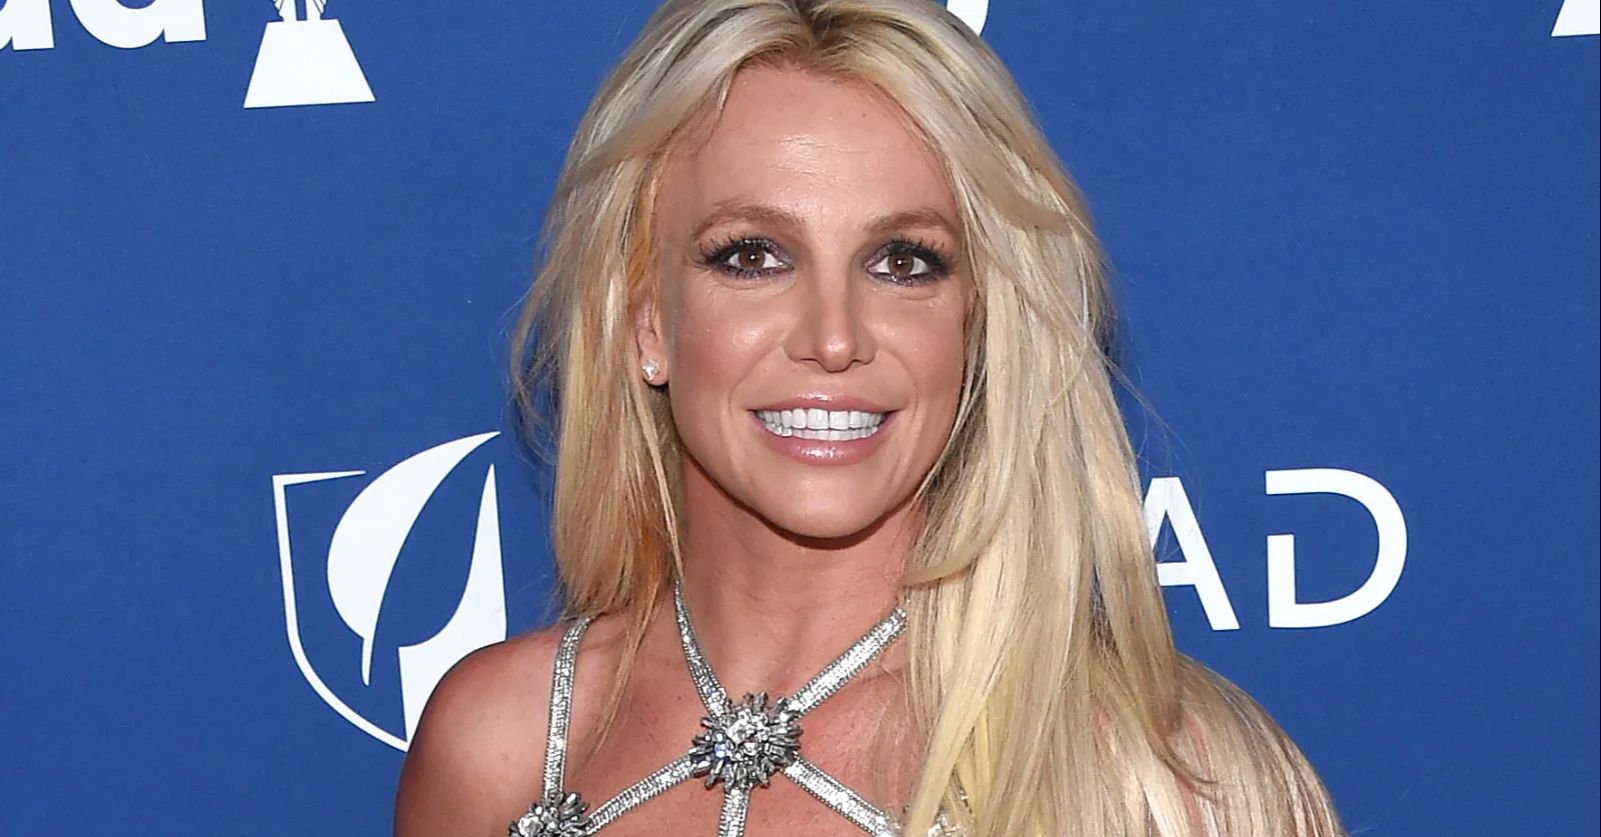 Britney Spears Spills Out Of Tiny White Bikini While Dancing At Home